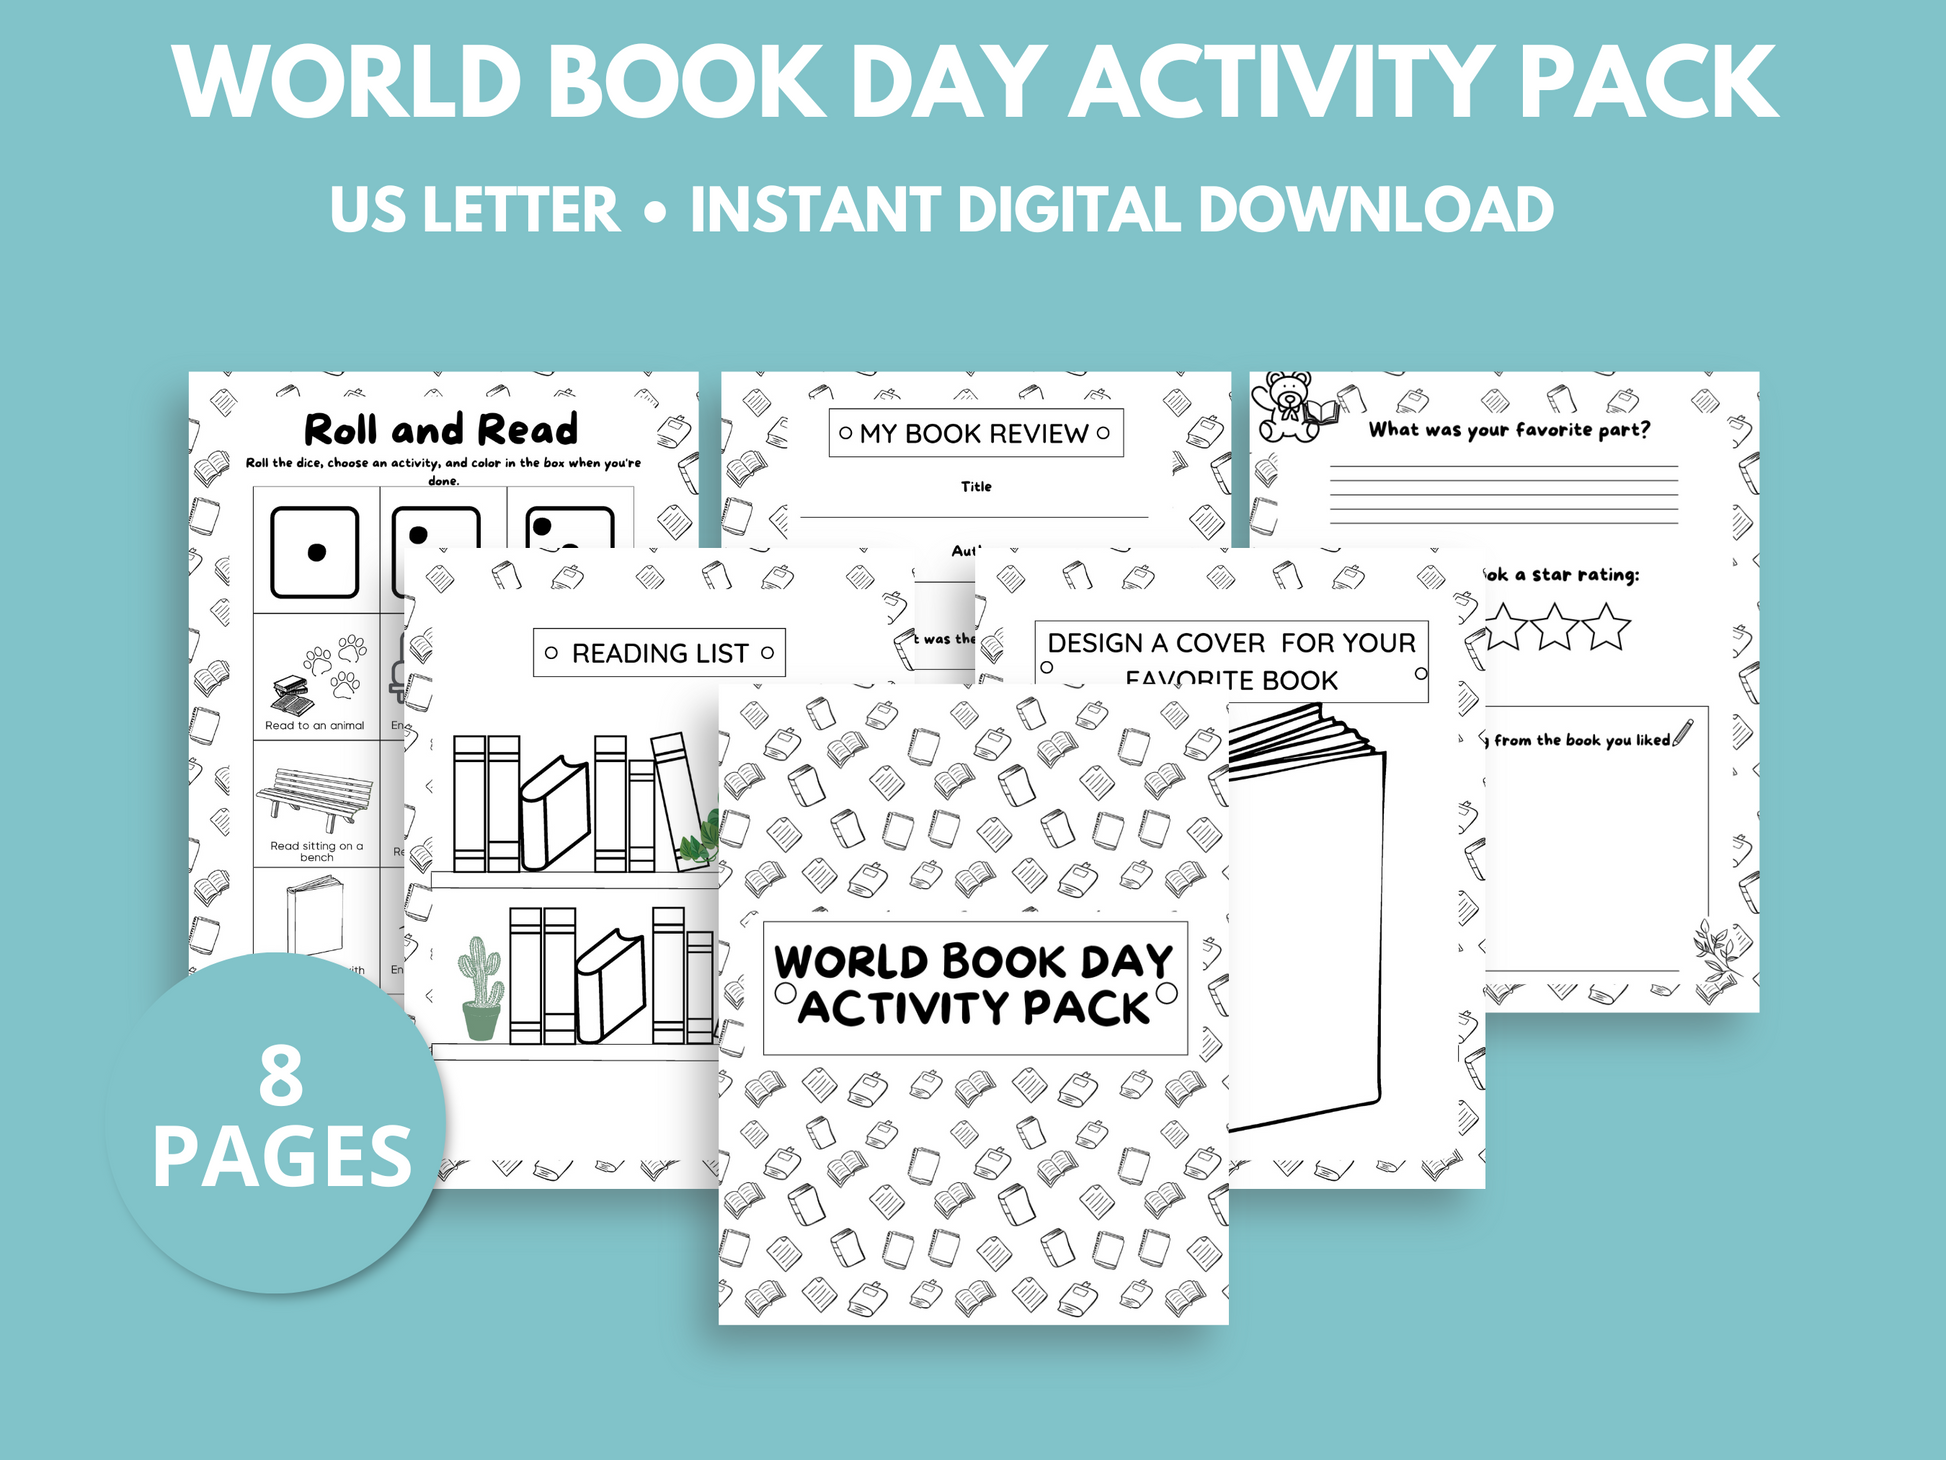 World Book Day Activity Pack showing 6 black & white pages of the printable.